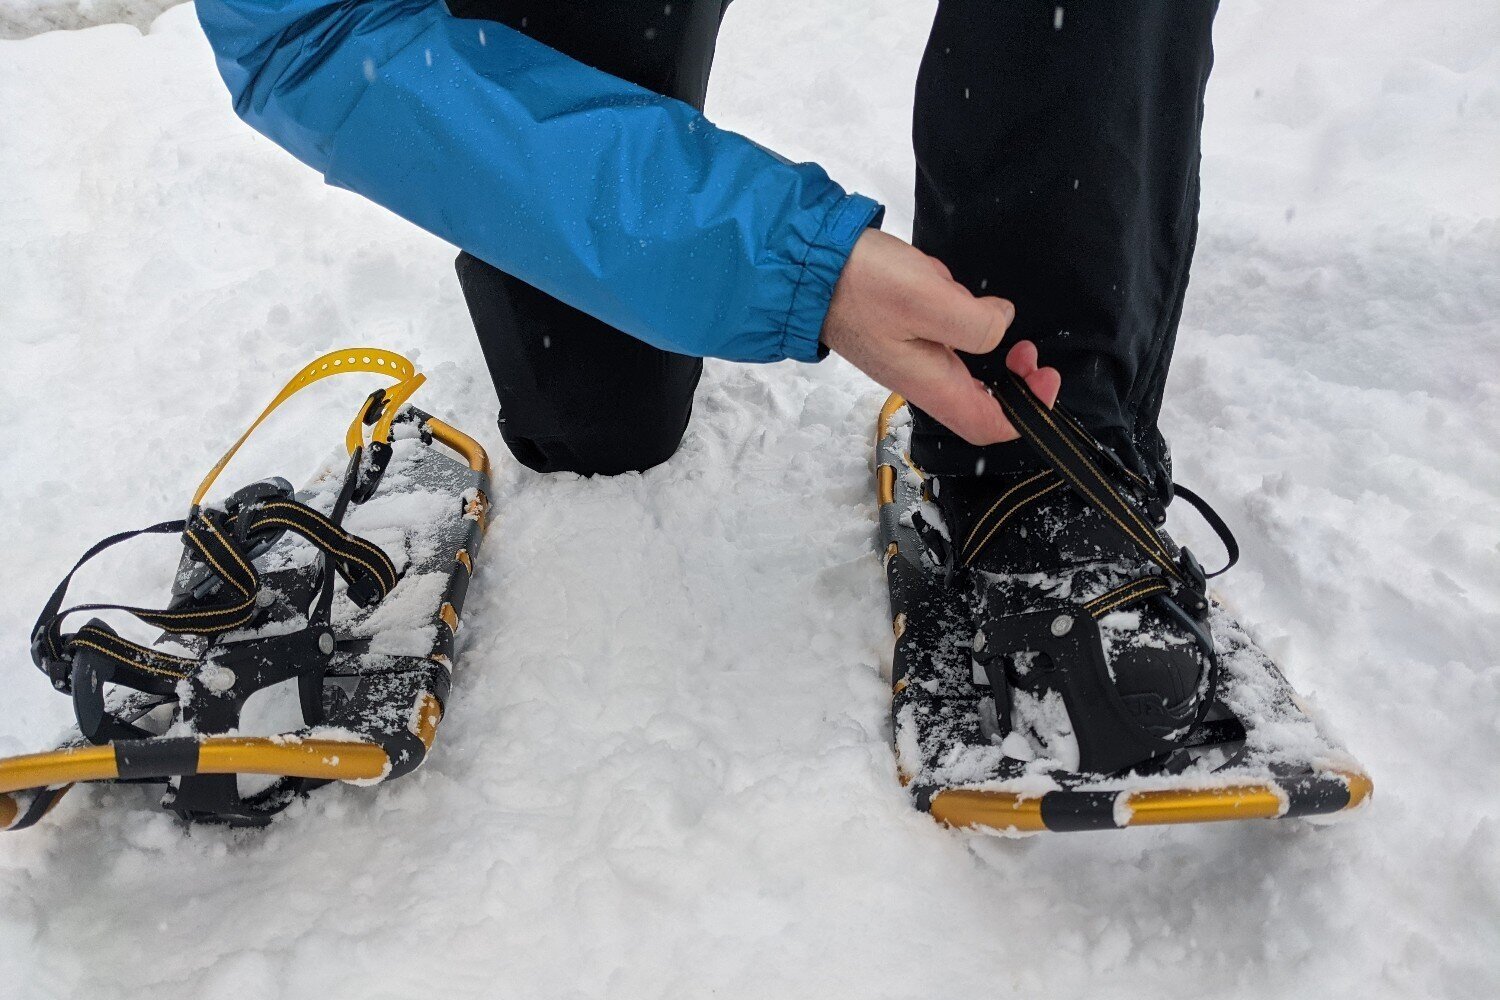 The single-pull lace bindings on the Atlas Montane Snowshoes are comfortable and easy to use.